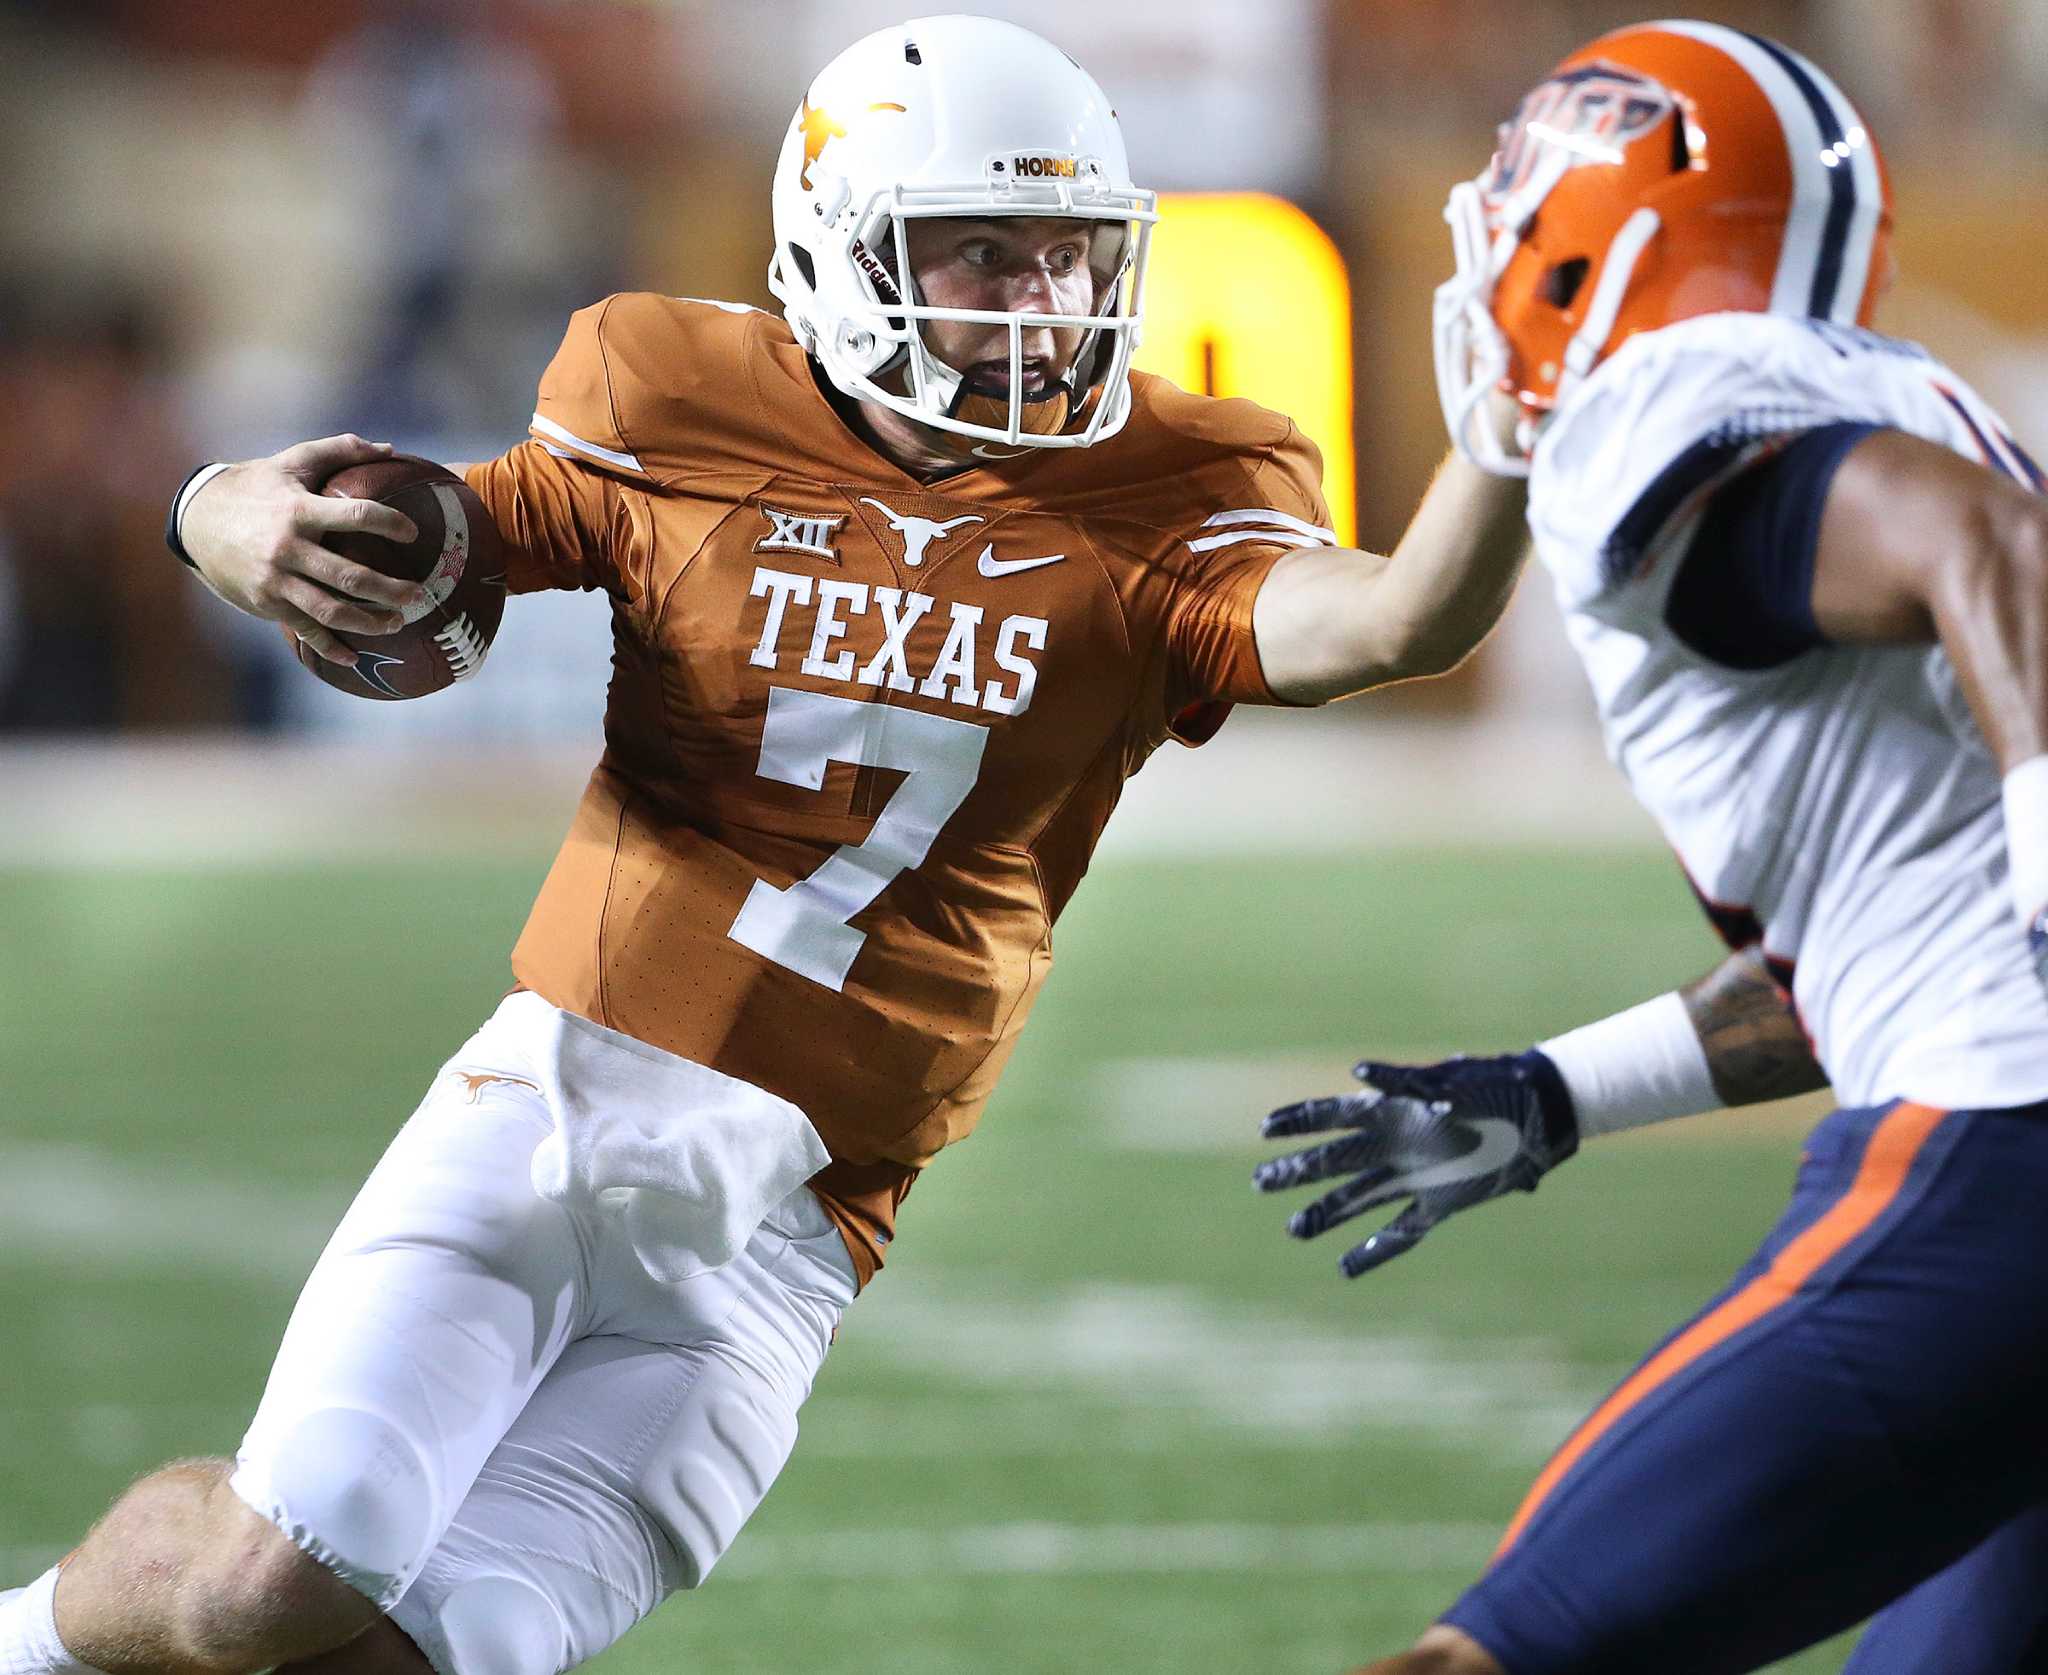 After UT quarterback controversy, everyone’s happy